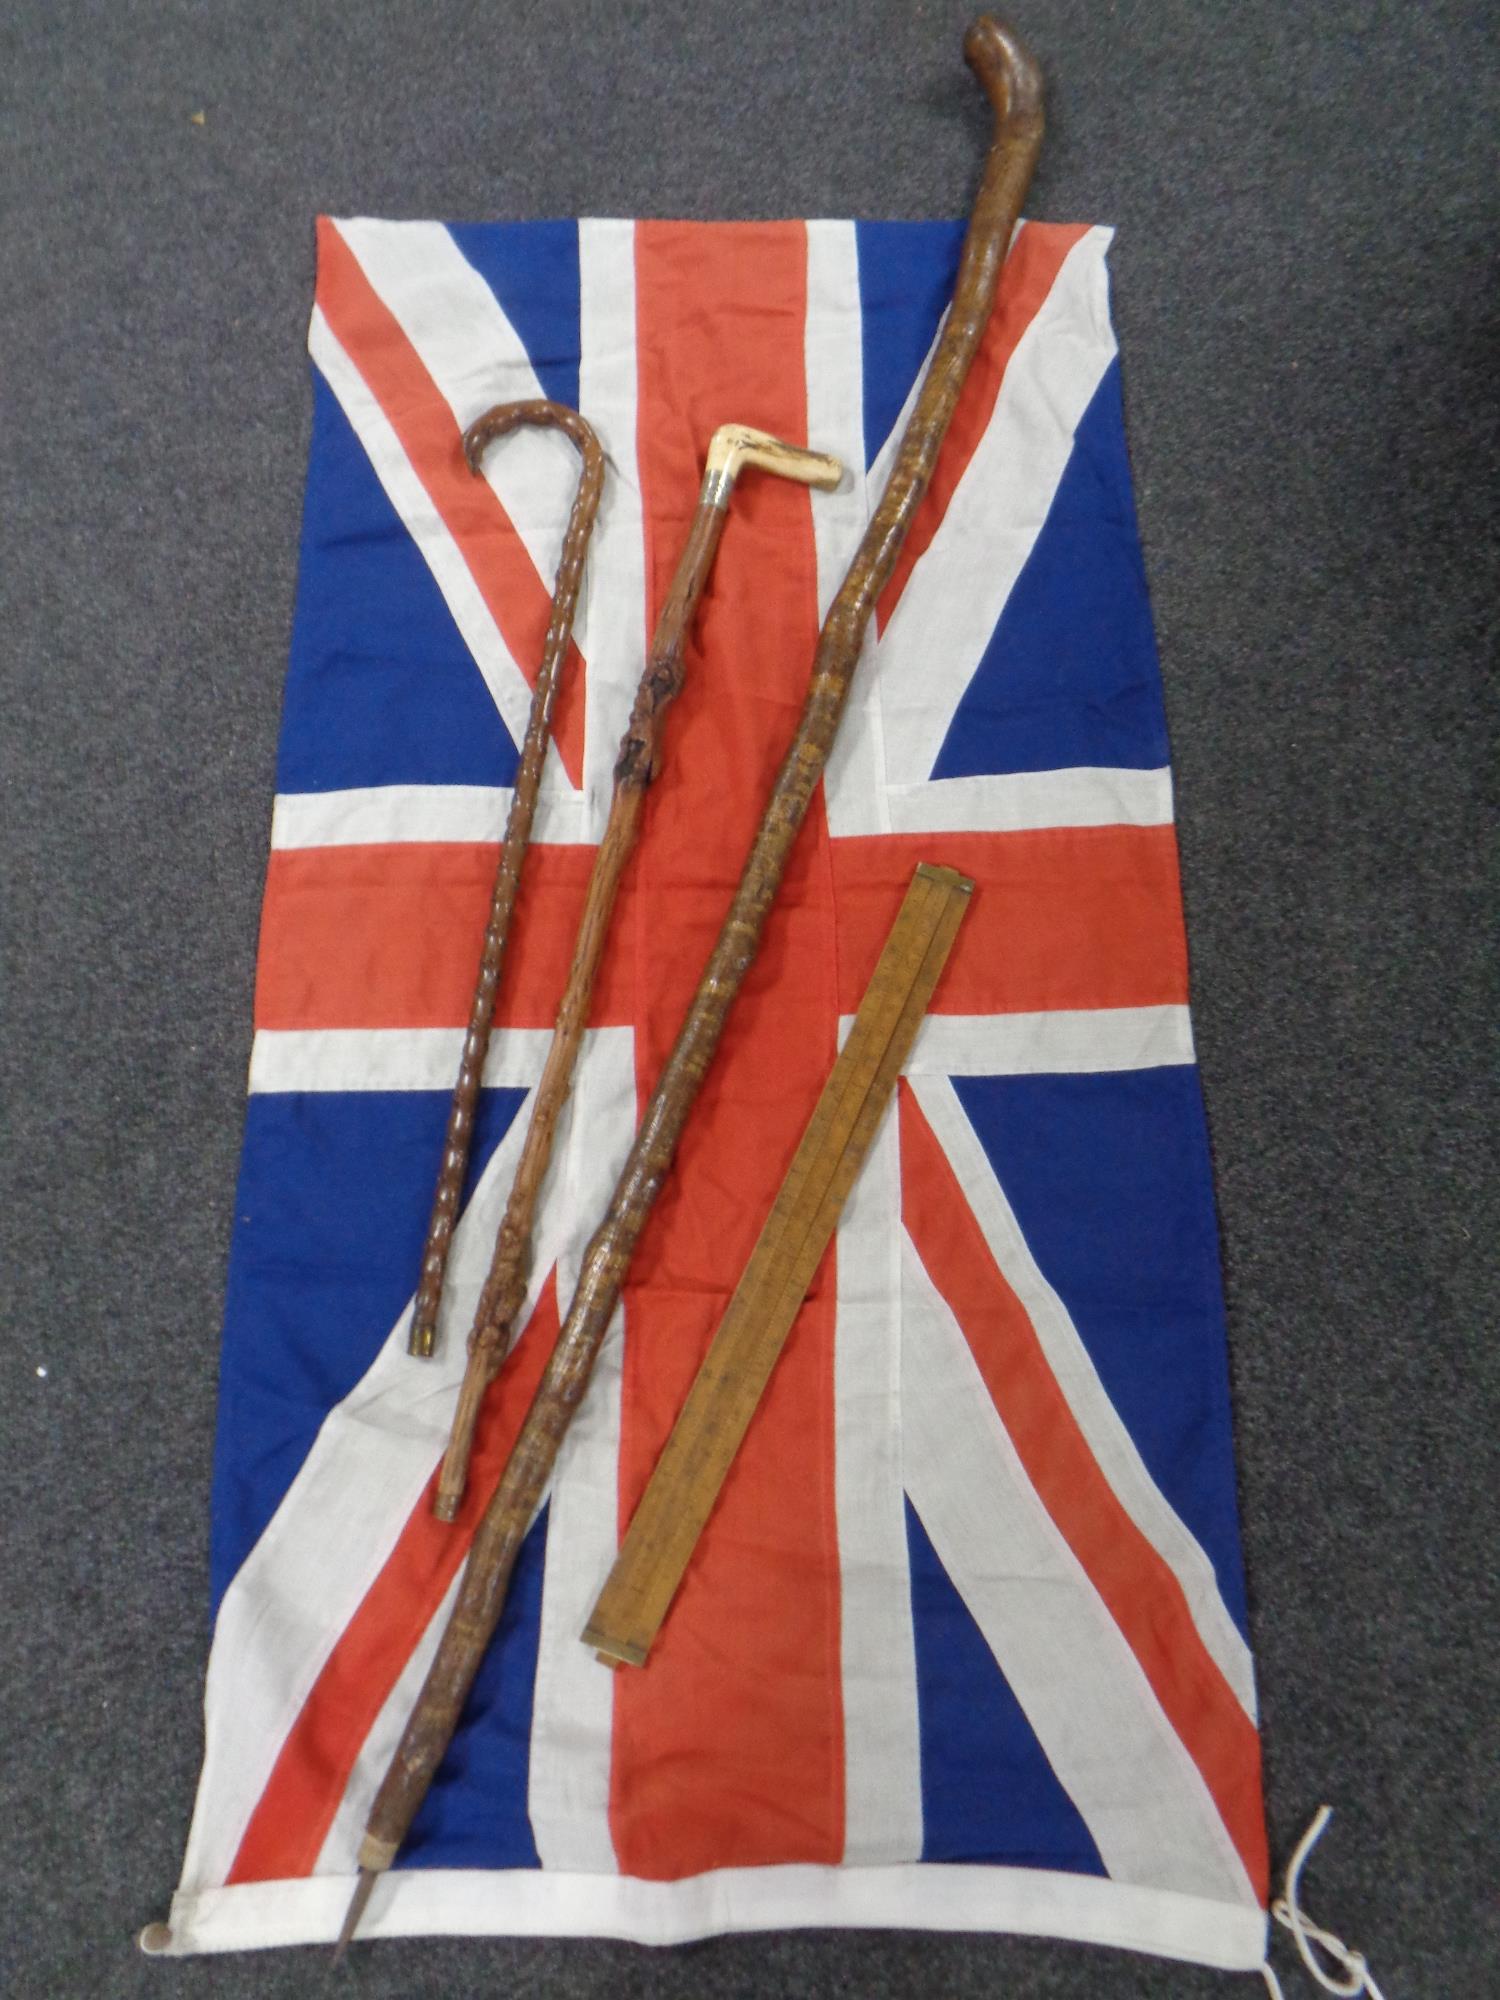 A Union flag together with 3 walking sticks and an extending wooden ruler